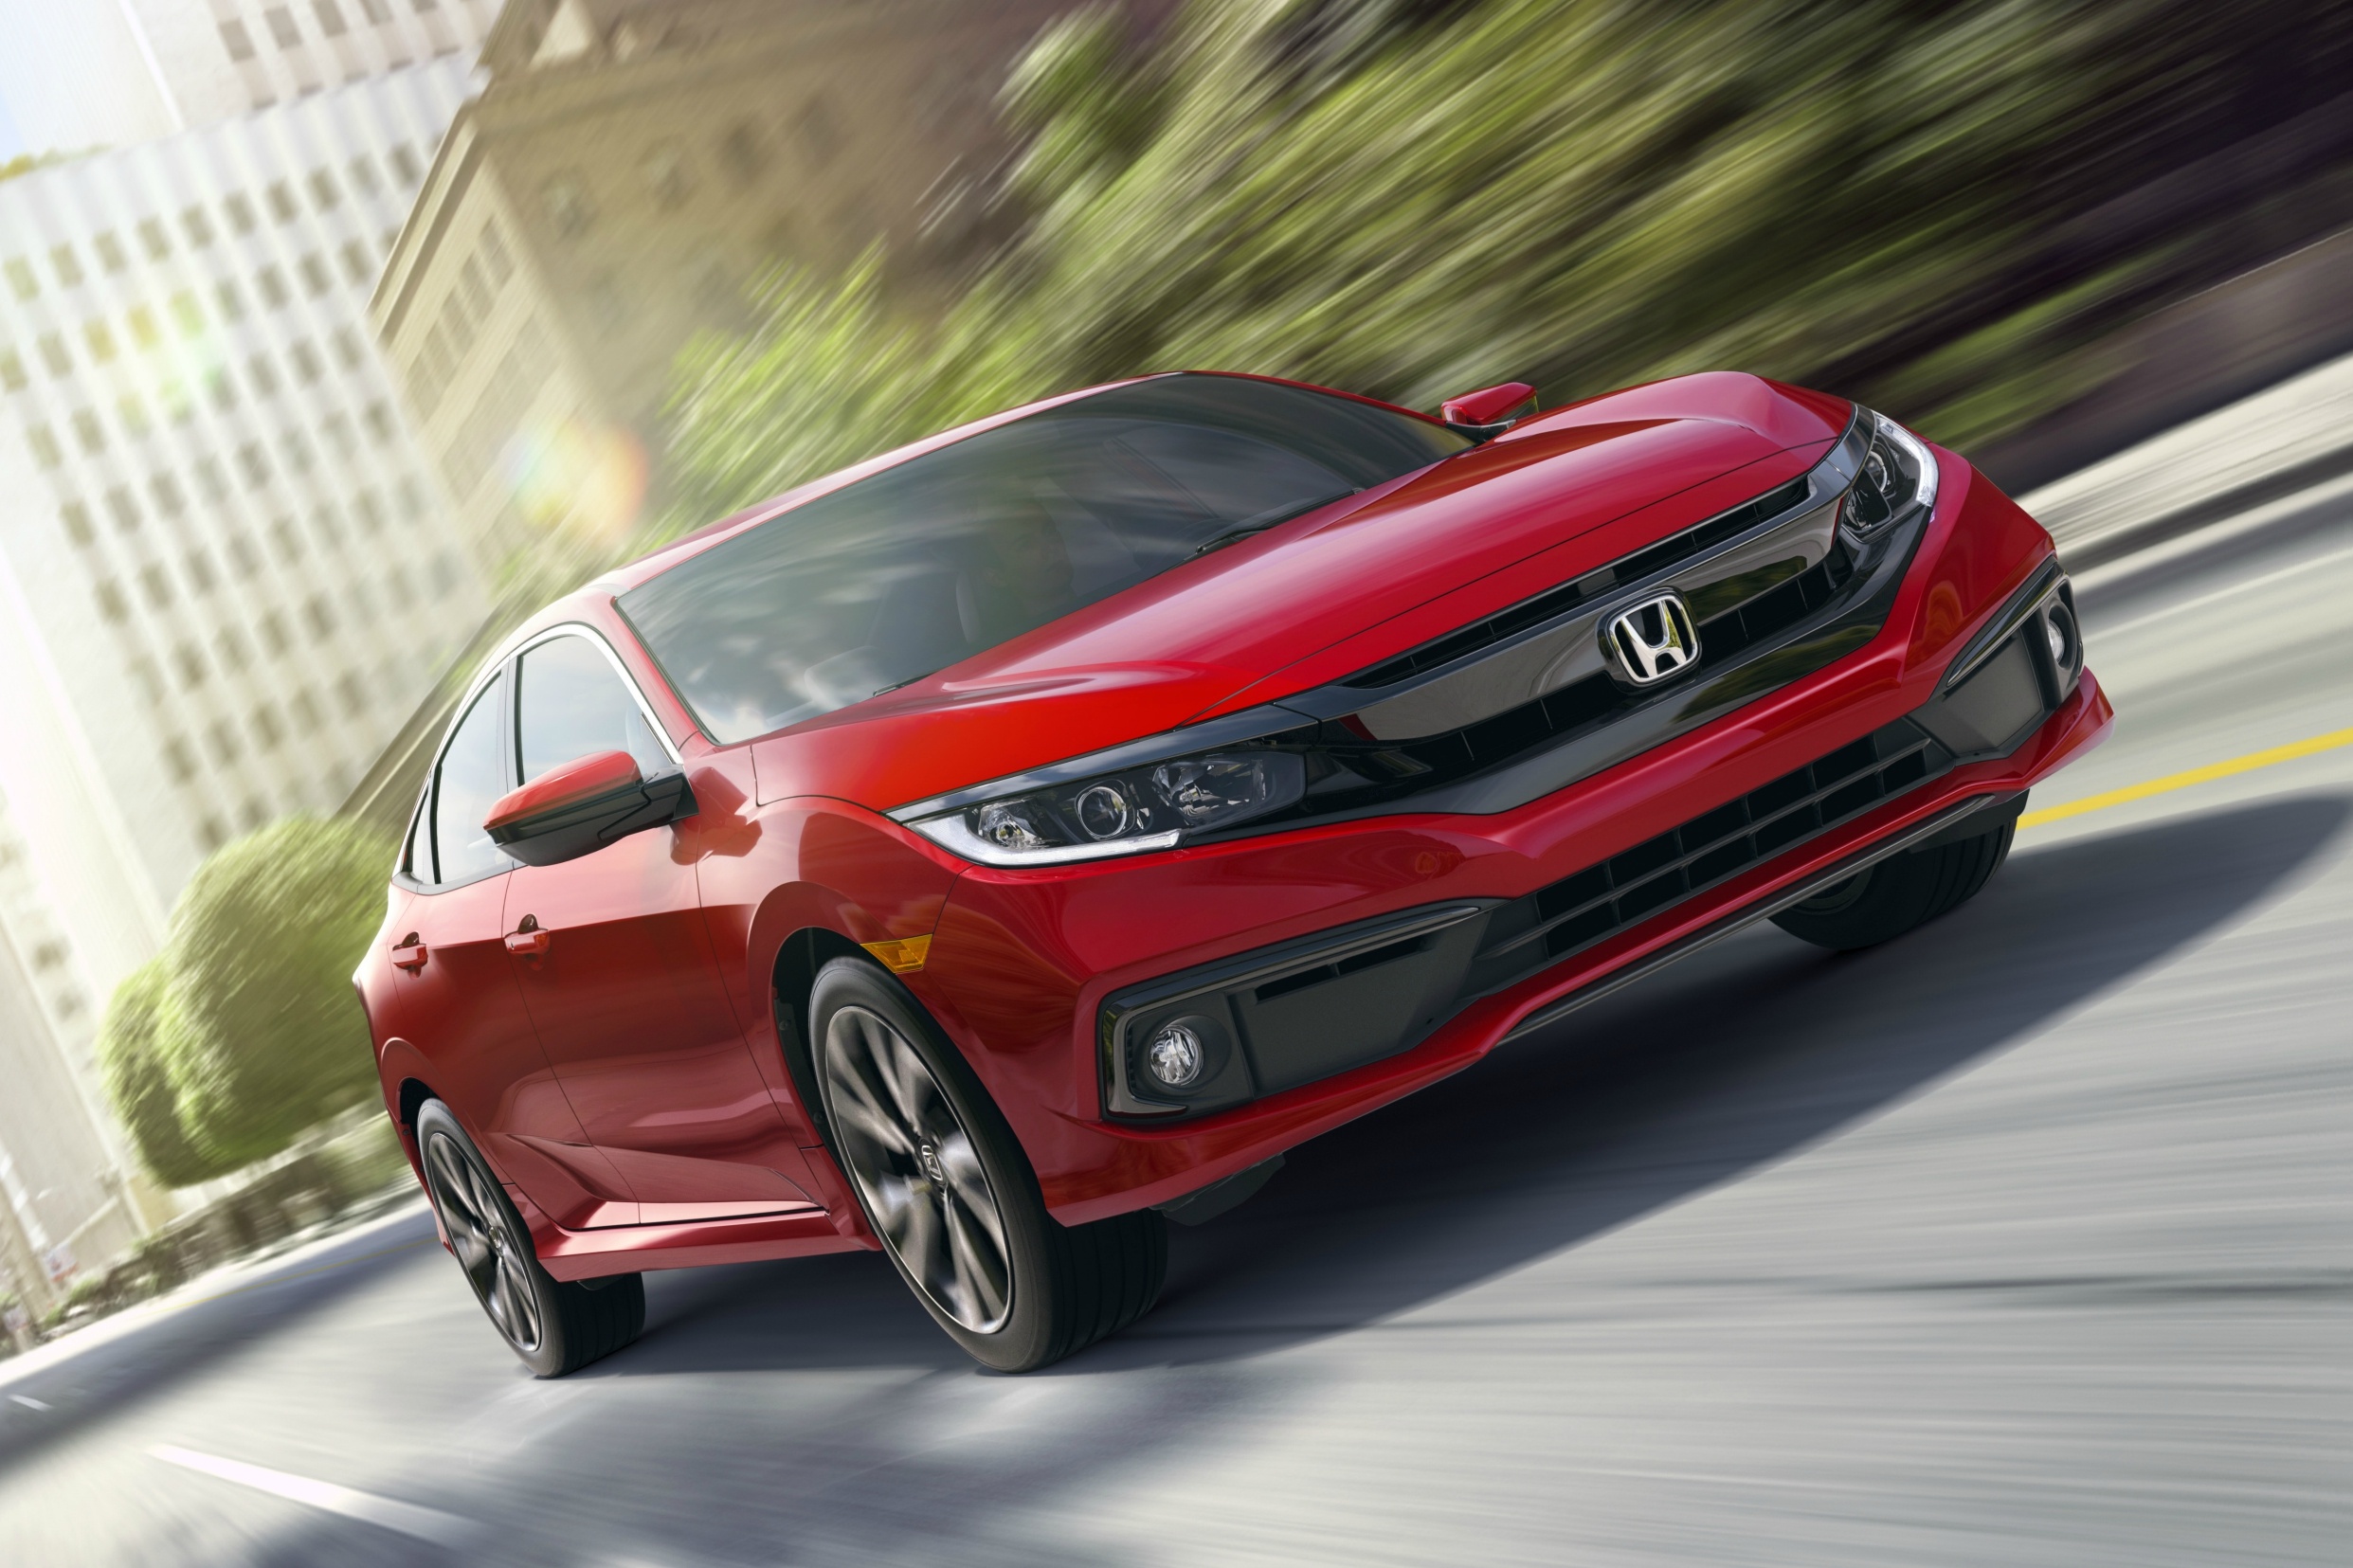 Honda Cars in June reports a four-fold increase in sales at 4,767 units